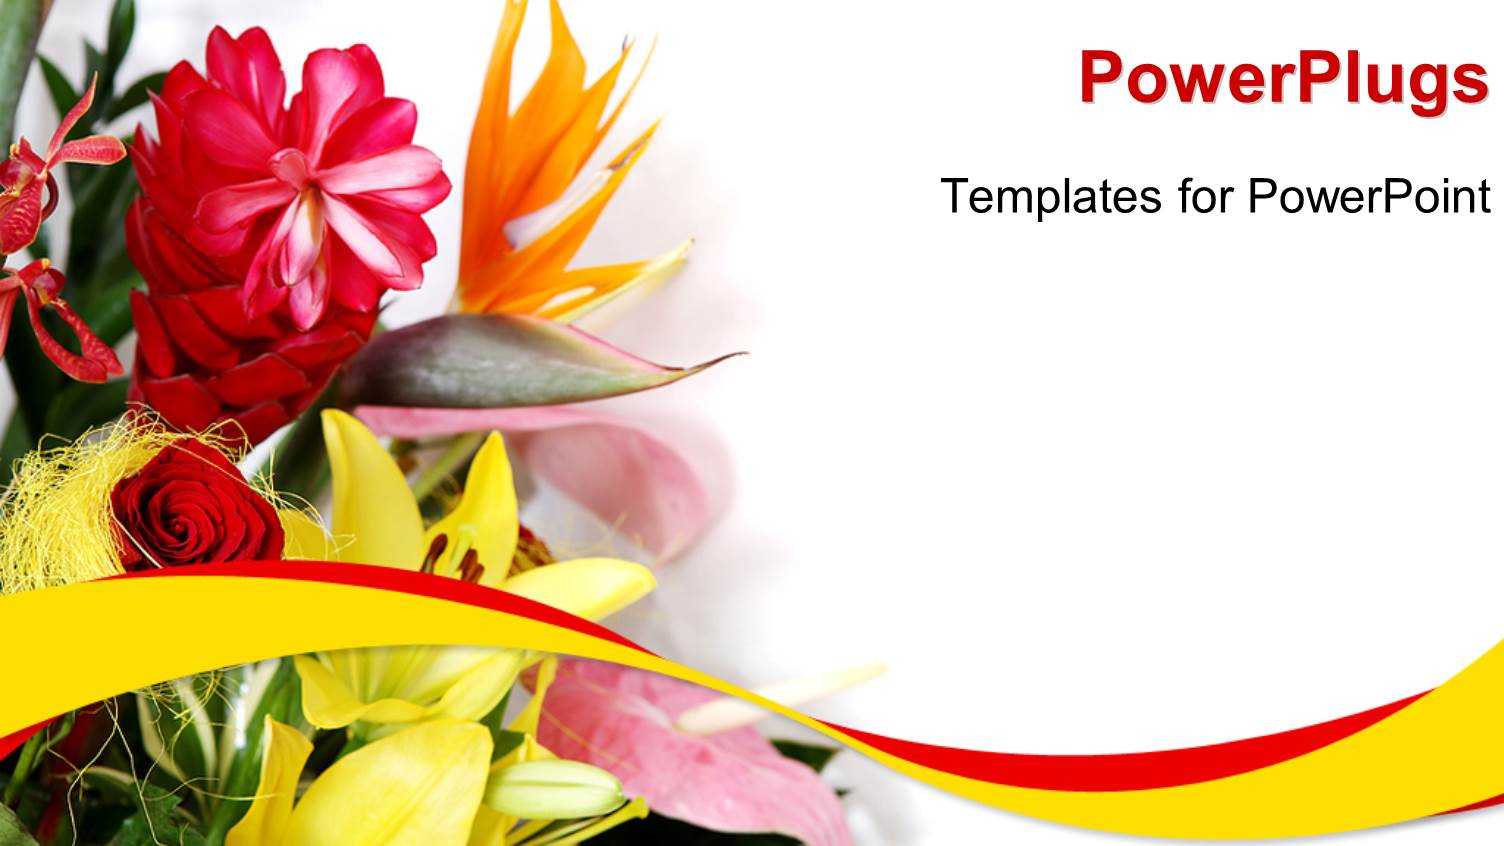 Greeting Template. Greeting Cards Word Templates Publisher In Greeting Card Template Powerpoint